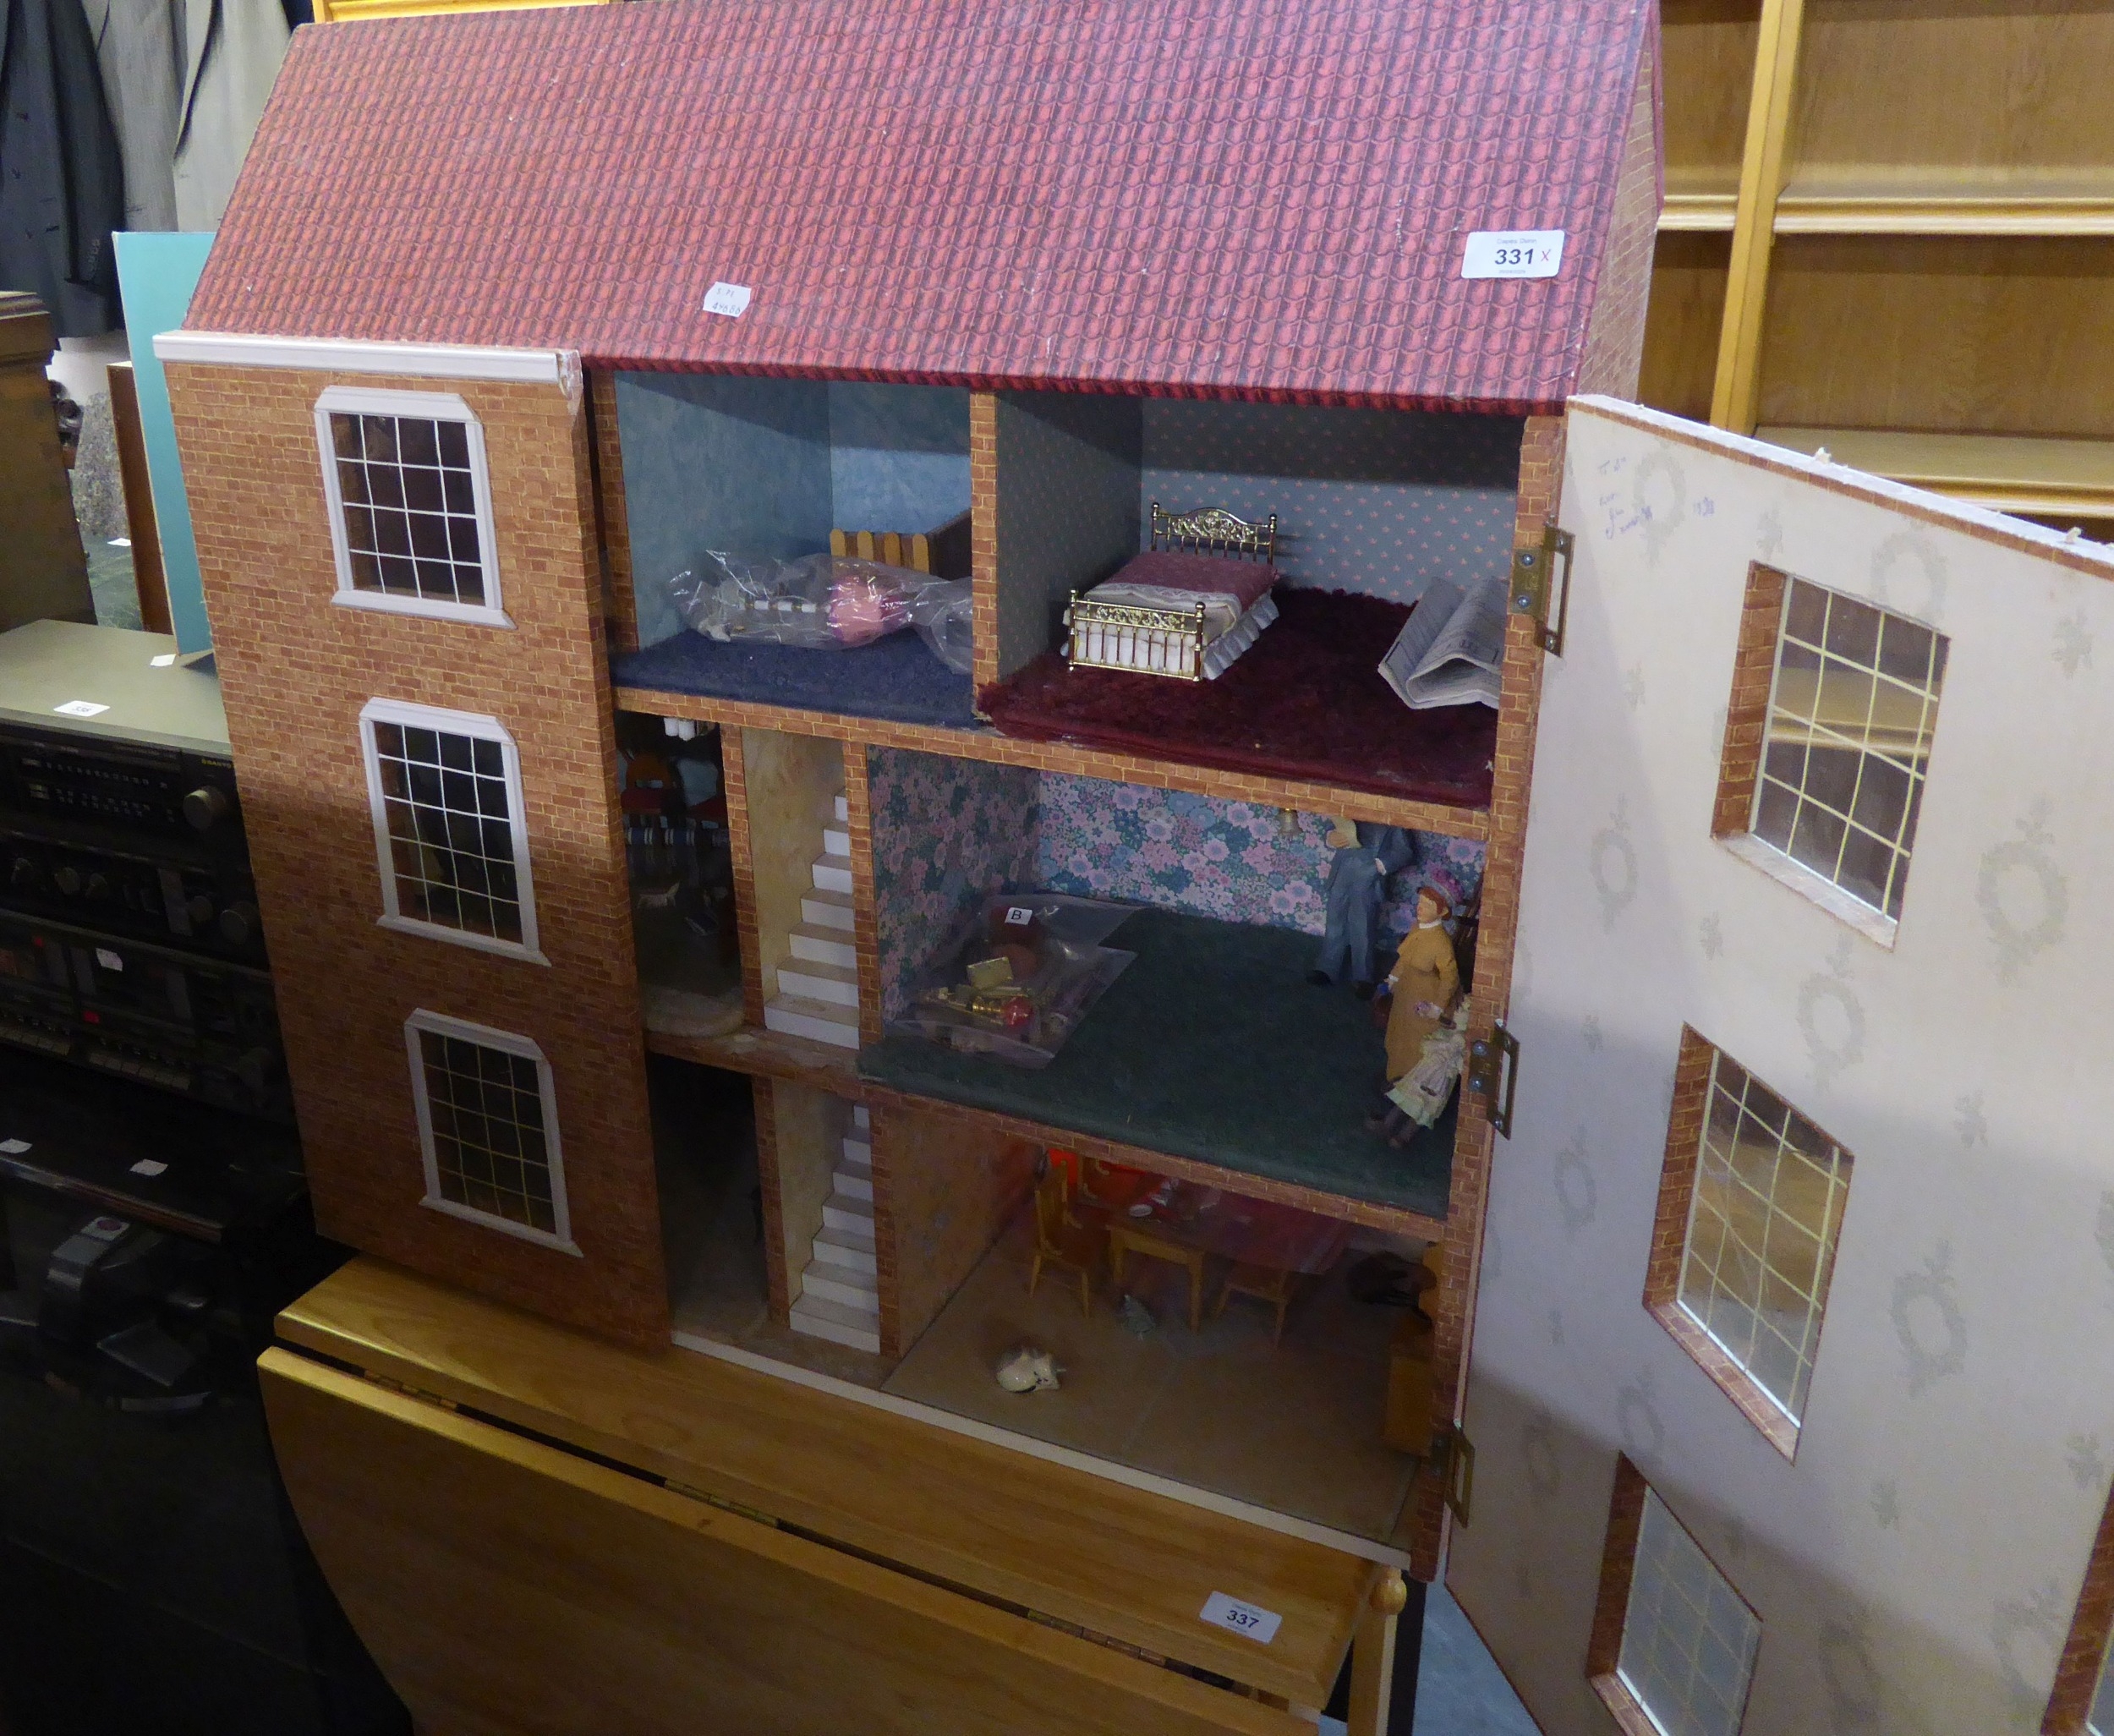 A THREE STOREY DOLLS HOUSE, HAVING TWO FULLY OPENING FRONT DOORS, AND A SELECTION OF DOLLS HOUSE - Image 2 of 2